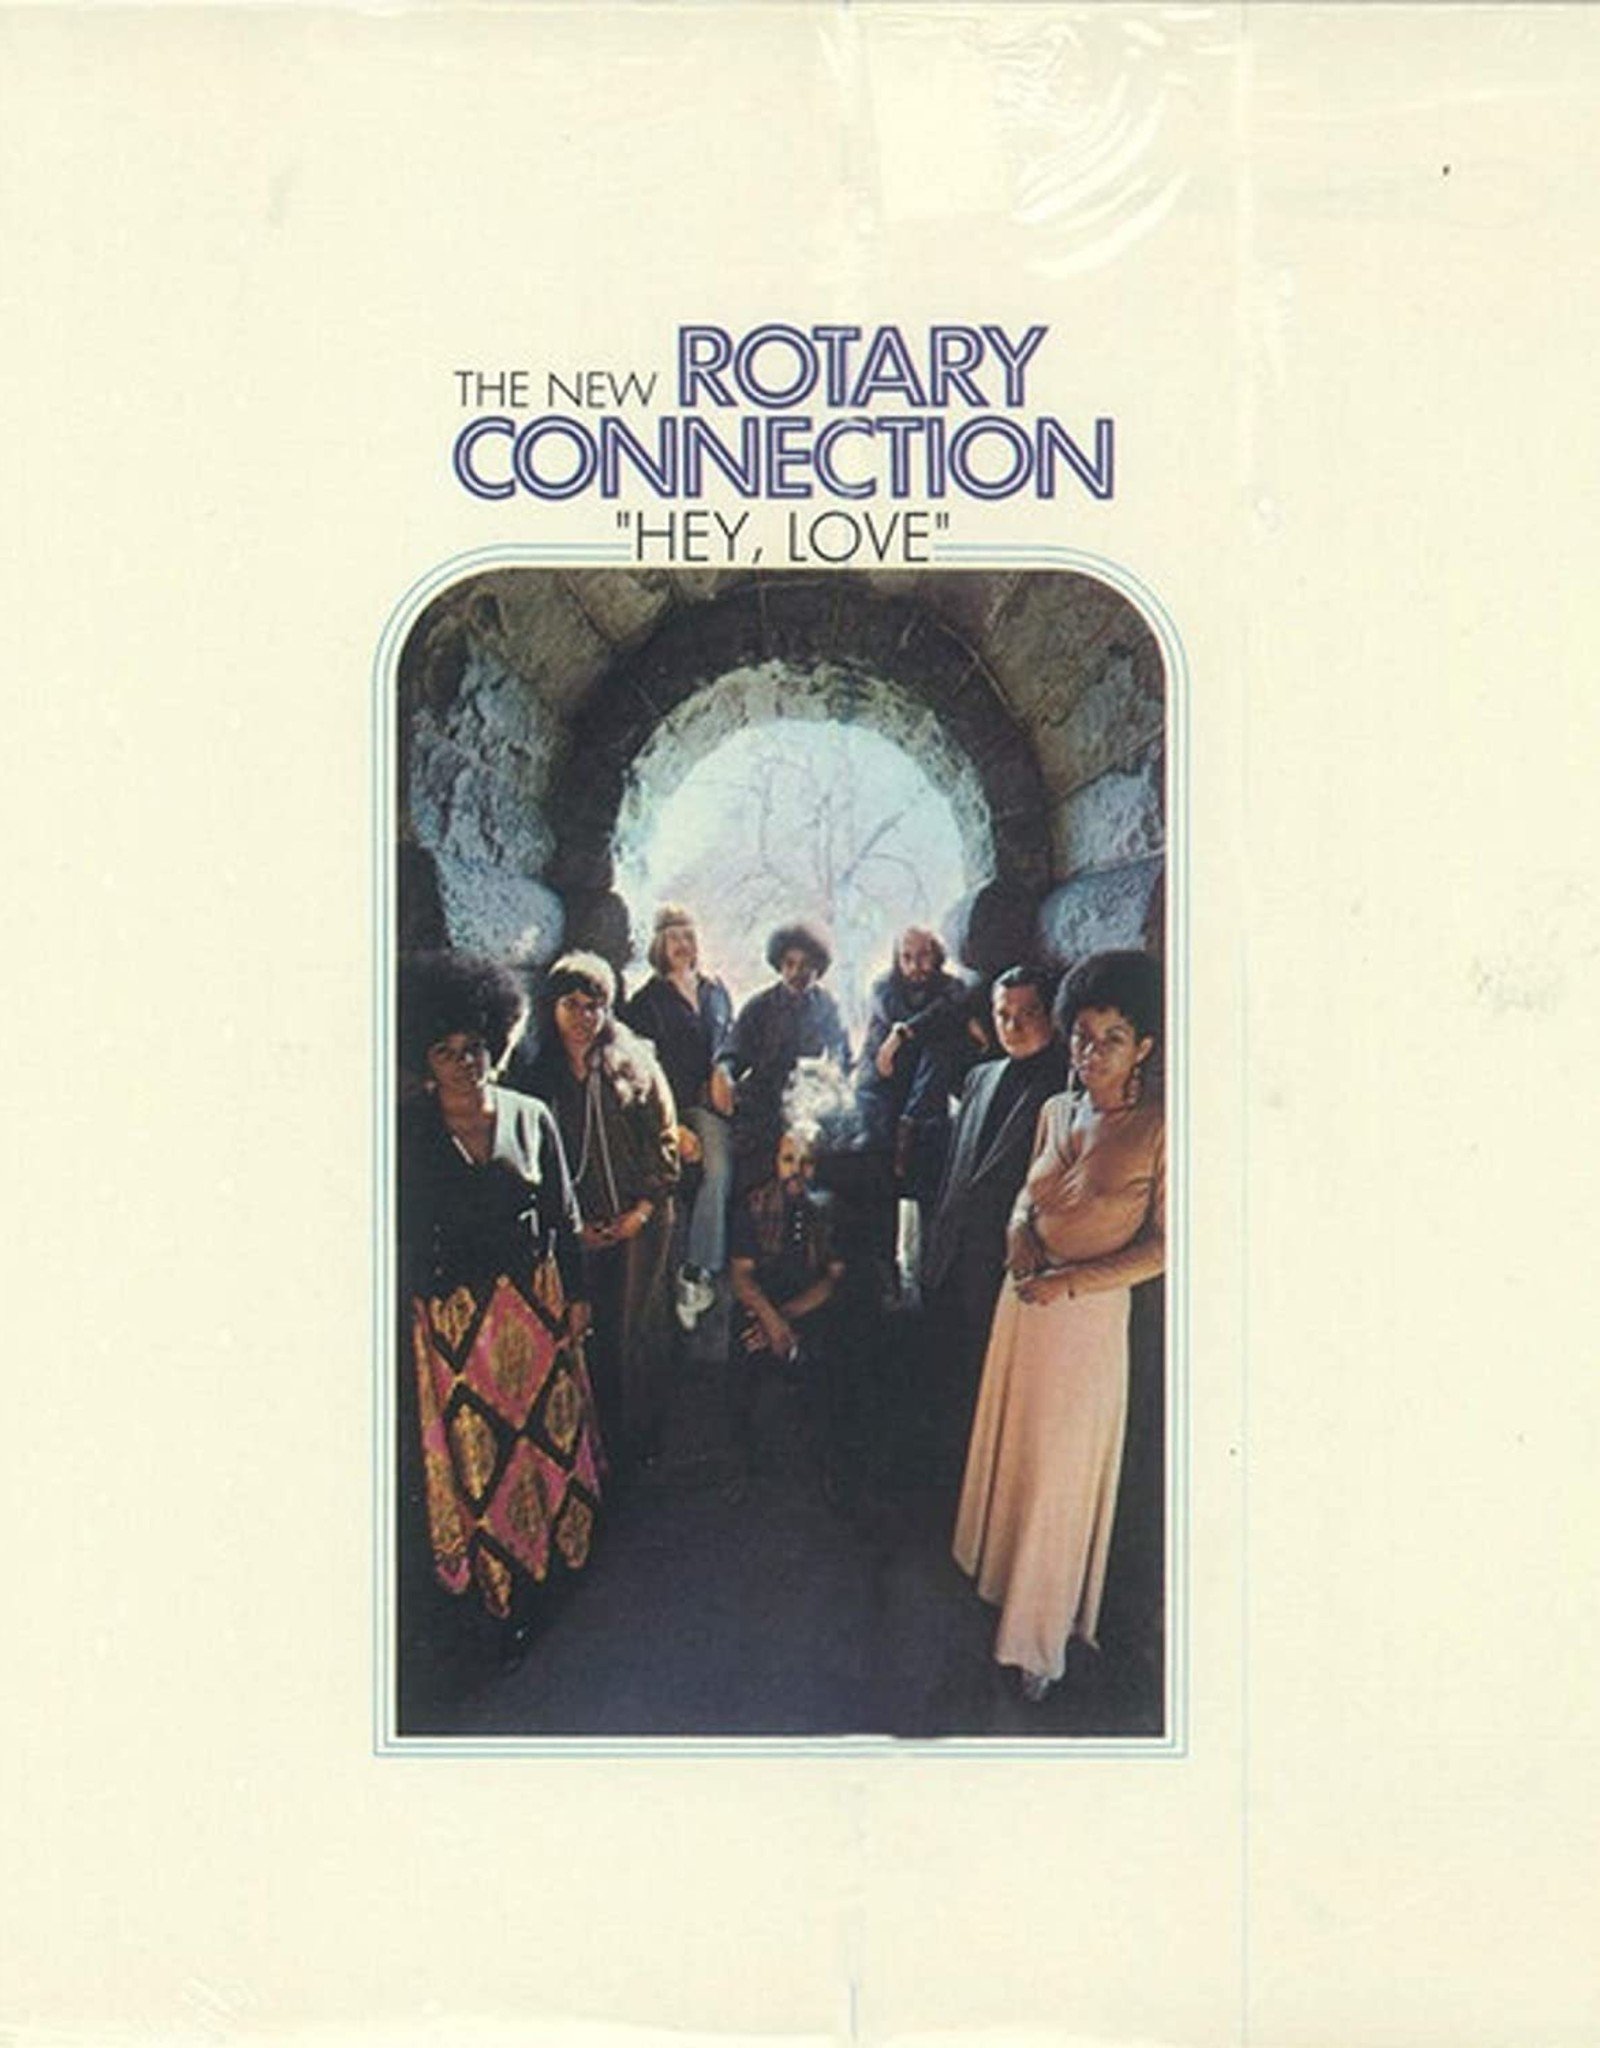 Rotary Connection - Hey Love